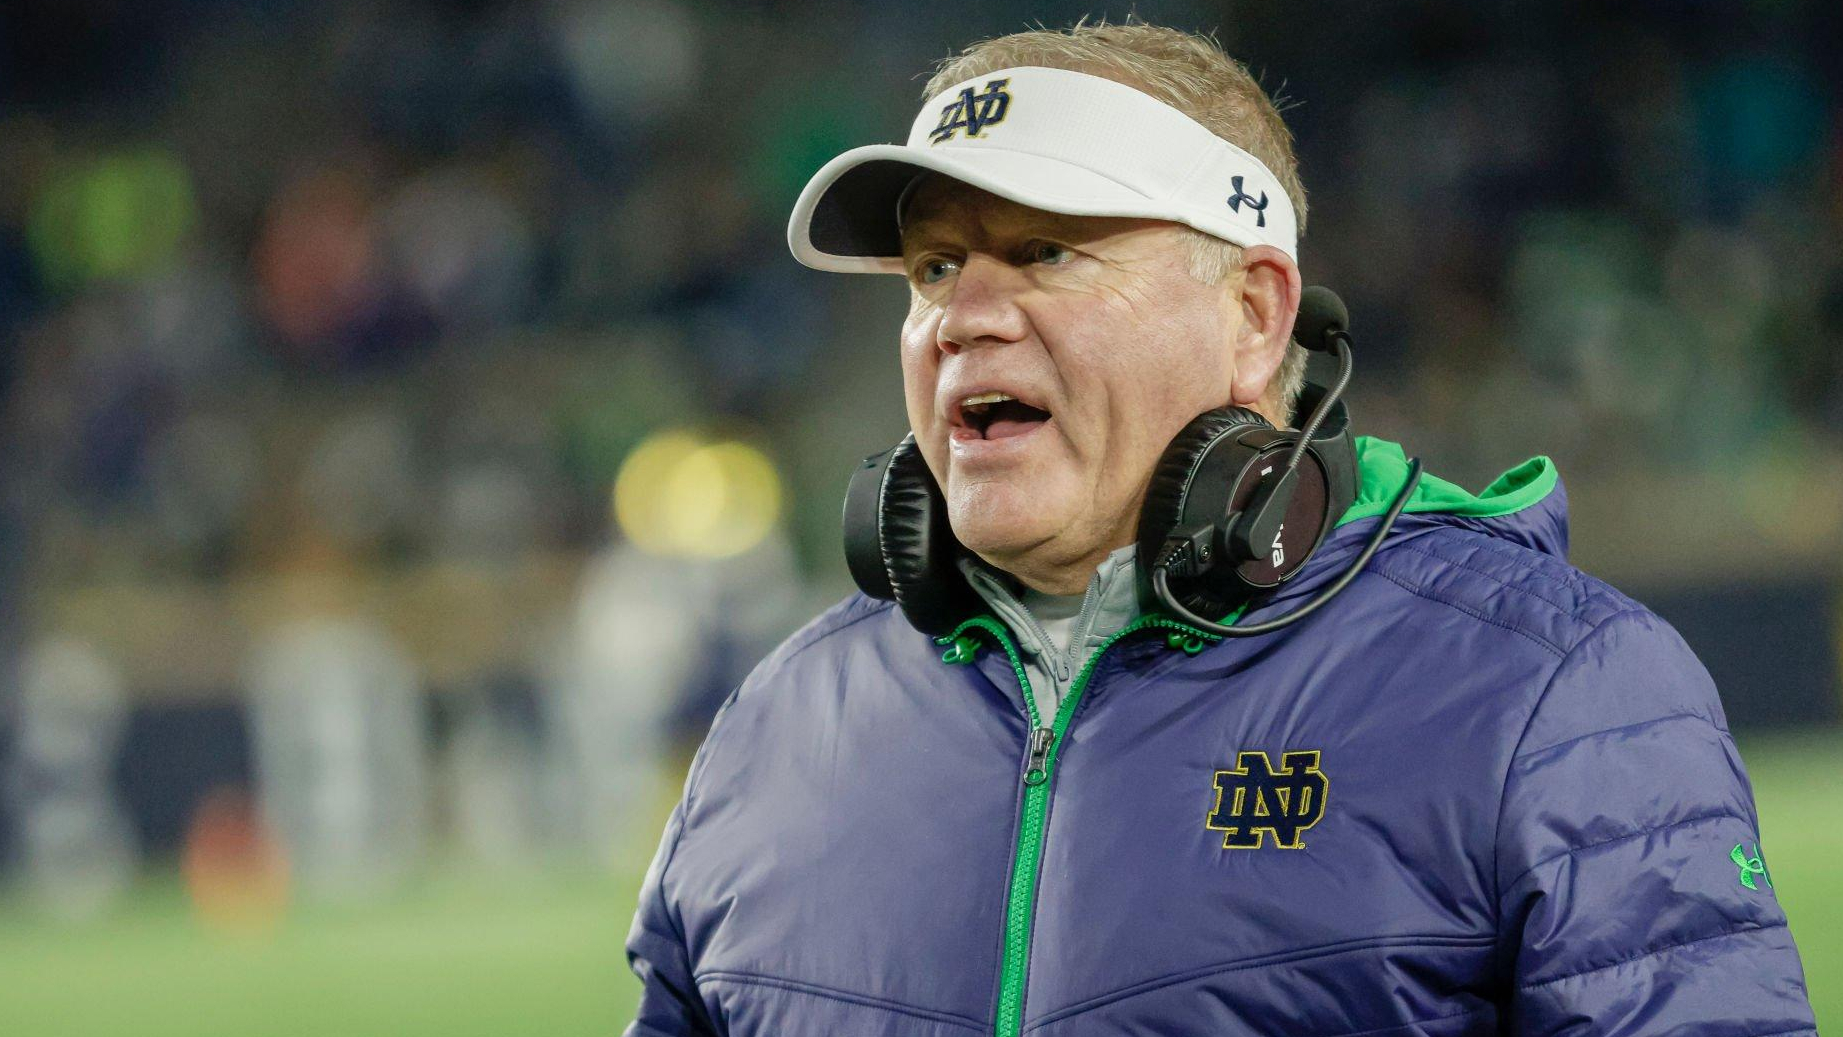 Former Notre Dame Fighting Irish head coach Brian Kelly is seen during the game against the Georgia Tech Yellow Jackets